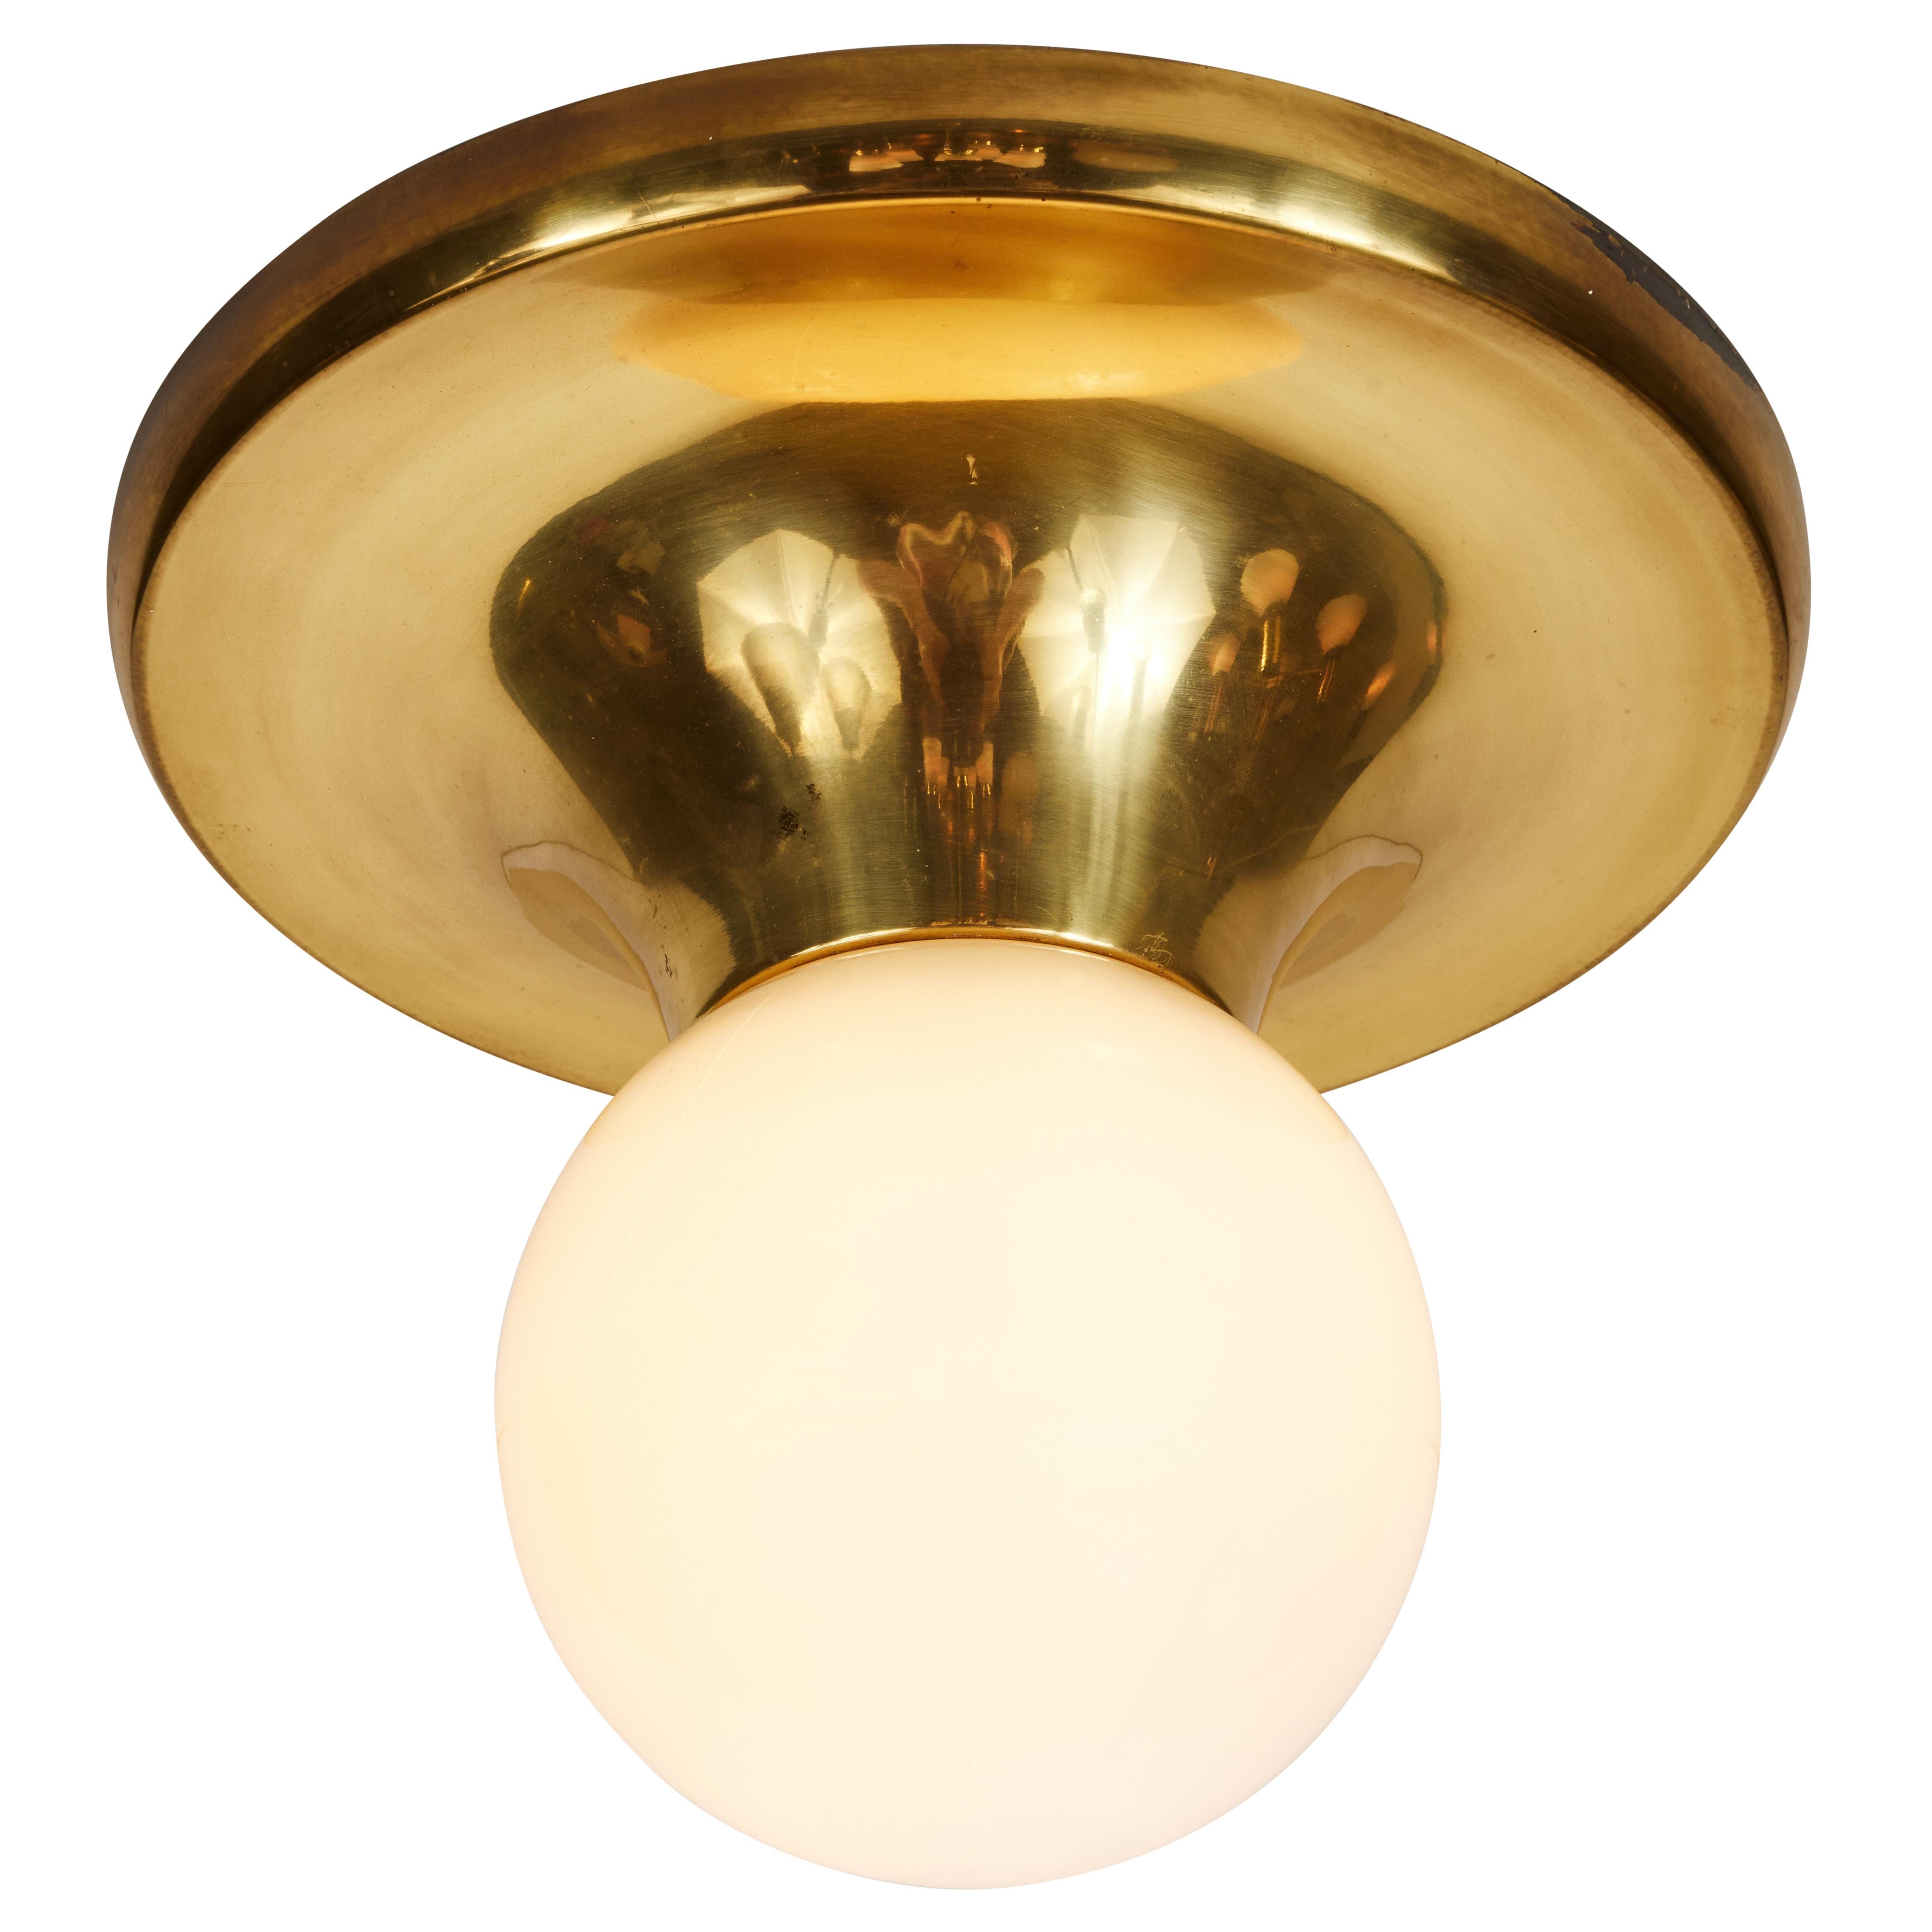 1960s Achille Castiglioni & Pier Giacomo 'Light Ball' Wall or Ceiling Lamp for Flos. Designed in 1965, this rare and vintage brass variant comes with satin opaque glass. An incredibly refined and iconic midcentury design that is quintessentially